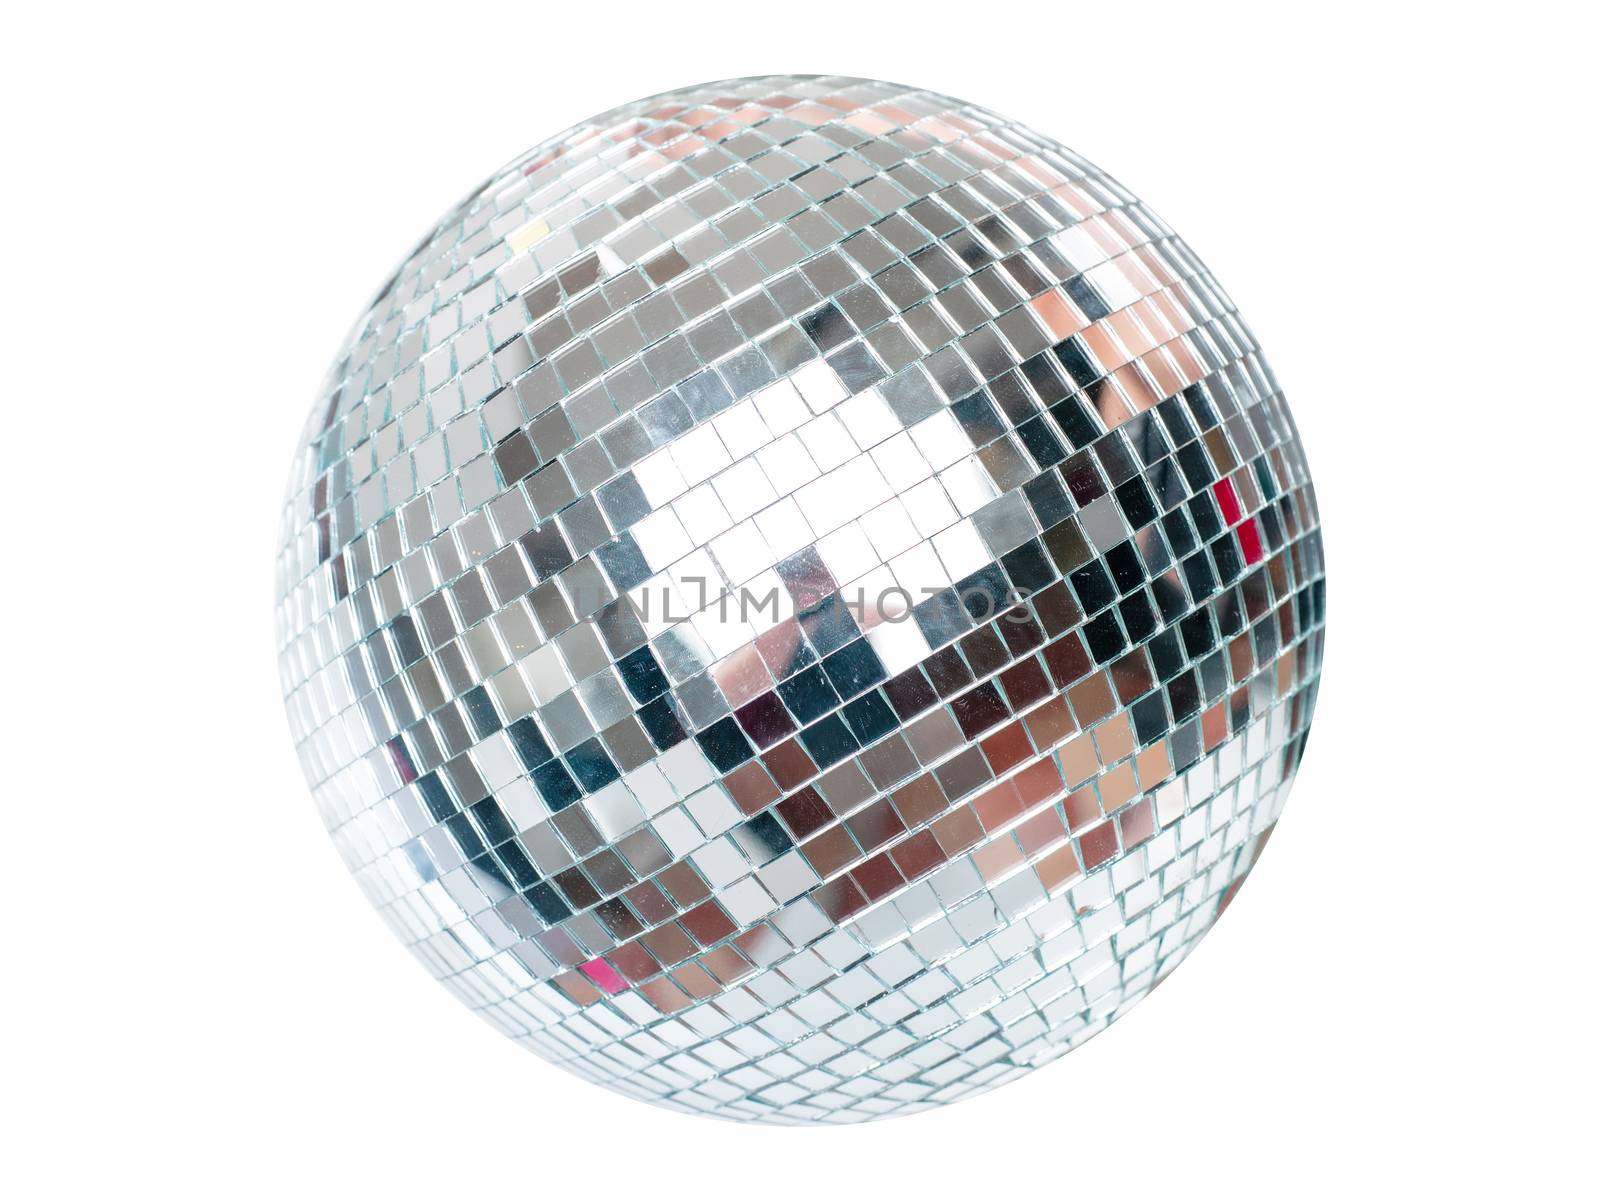 Disco Ball dance music event background by adamr